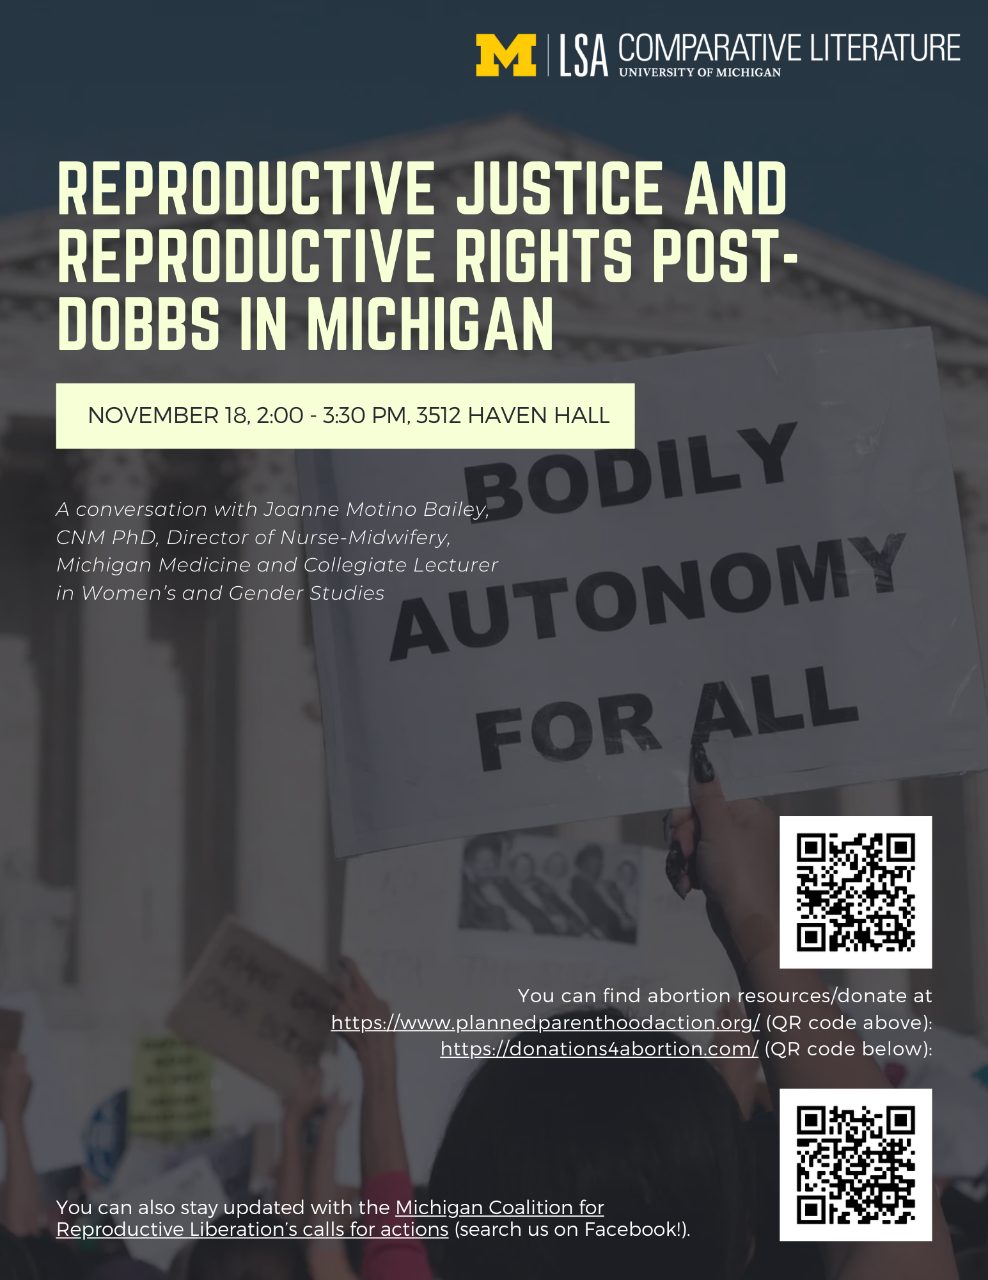 Text, “Reproductive Justice and Reproductive Rights Post-Dobbs in Michigan, November 18: 2-3:30 PM, 3512 Haven Hall. A conversation with Joanna Montino Bailey, CNM PhD, Director of Nurse-Midwifery, Michigan Medicine and Collegiate Lecturer in Women’s and Gender Studies.”